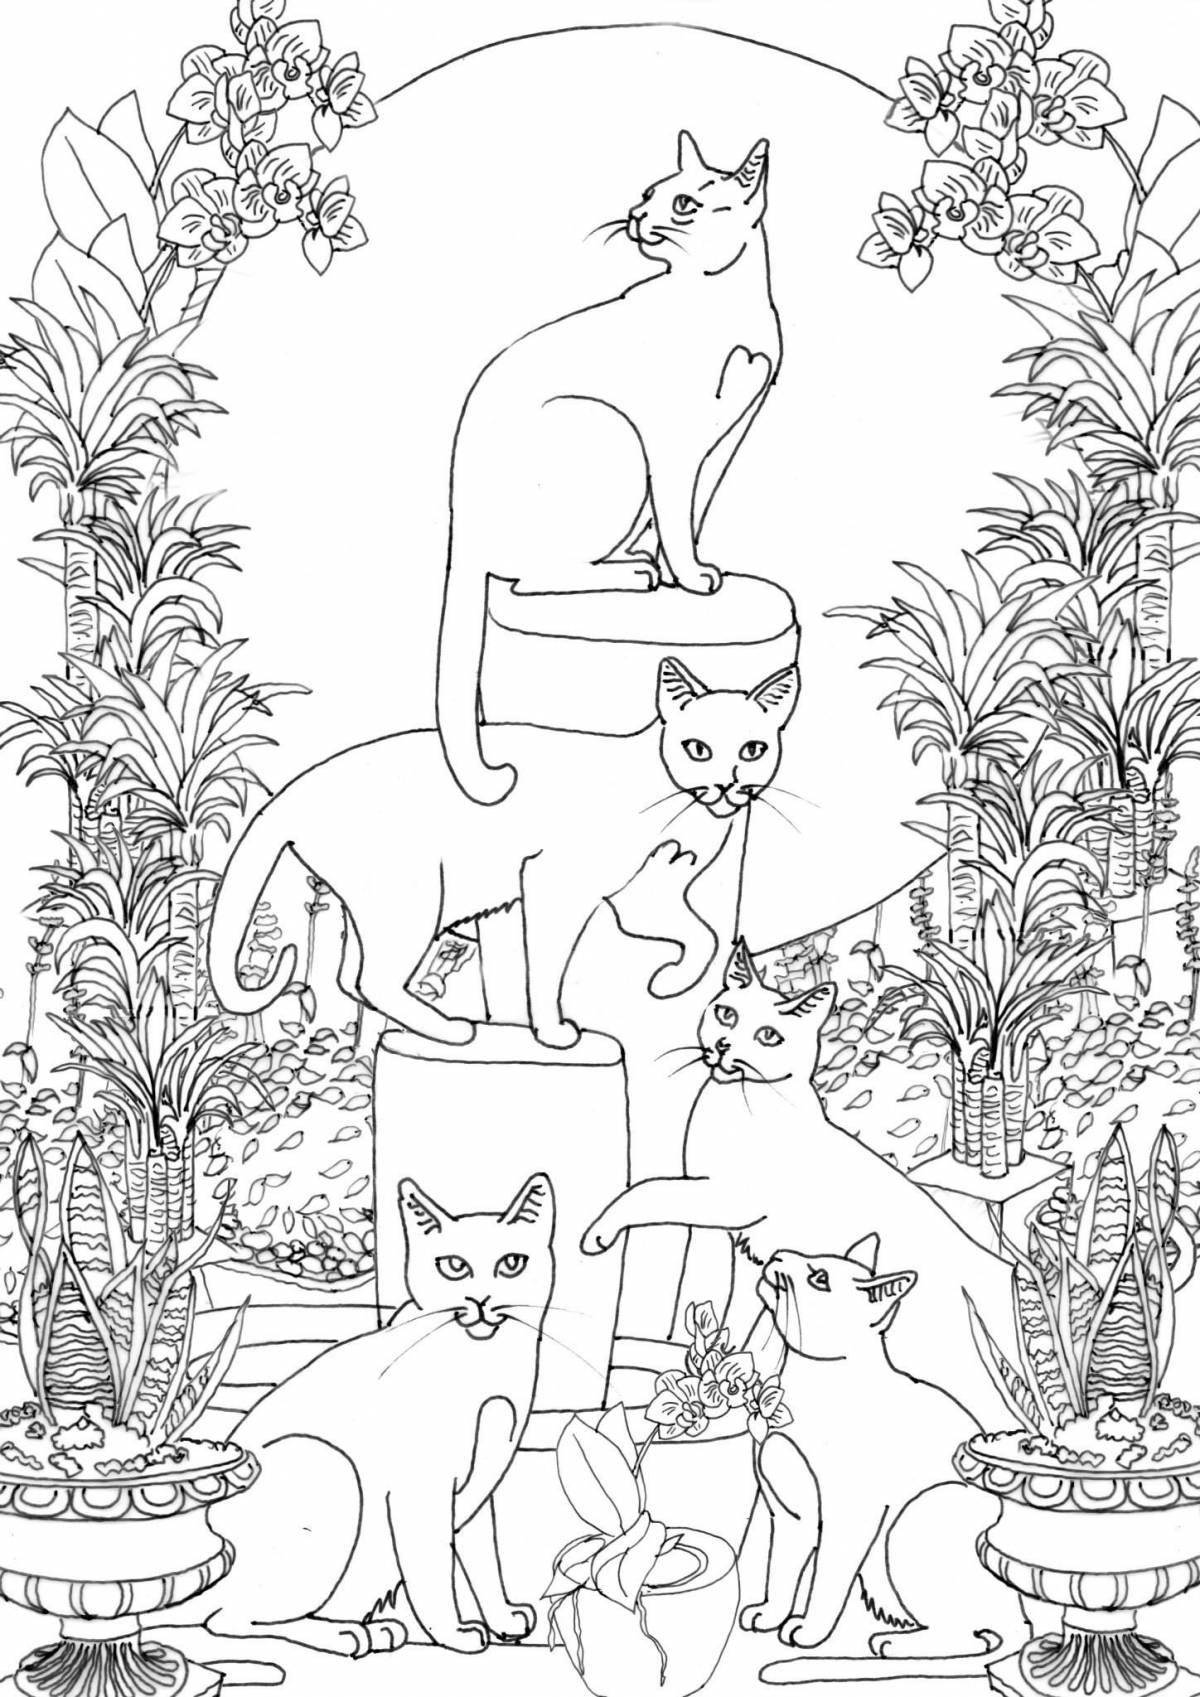 Curious real cat coloring page